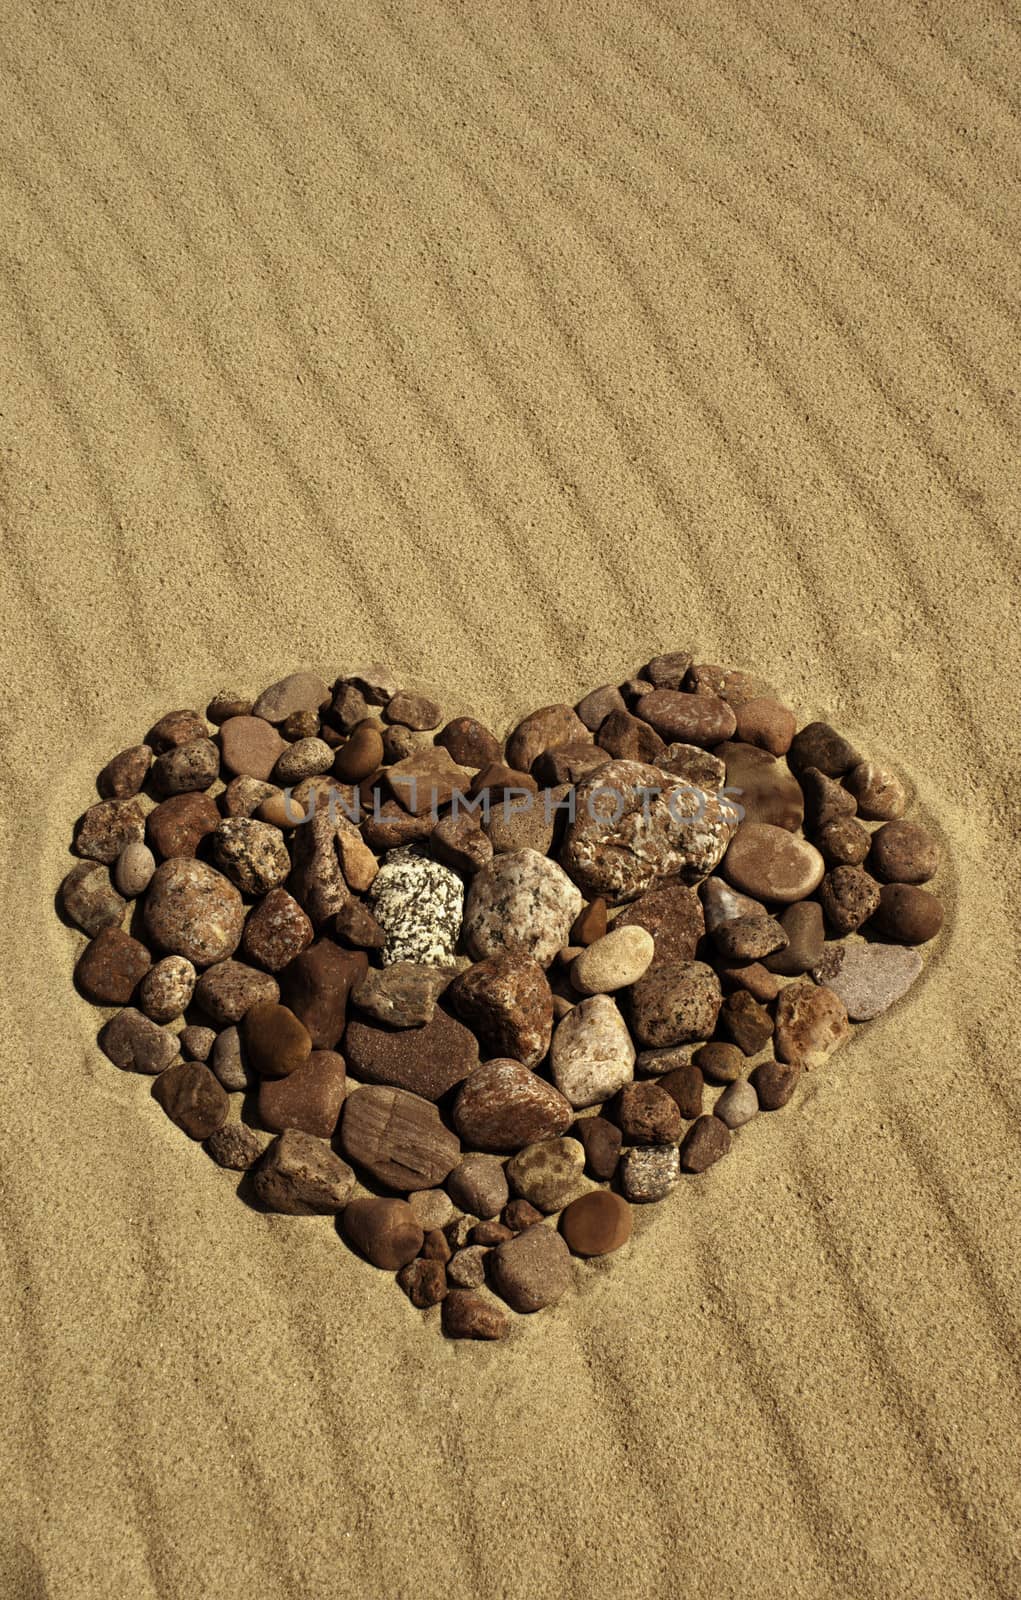 Heart made of stones in the sand